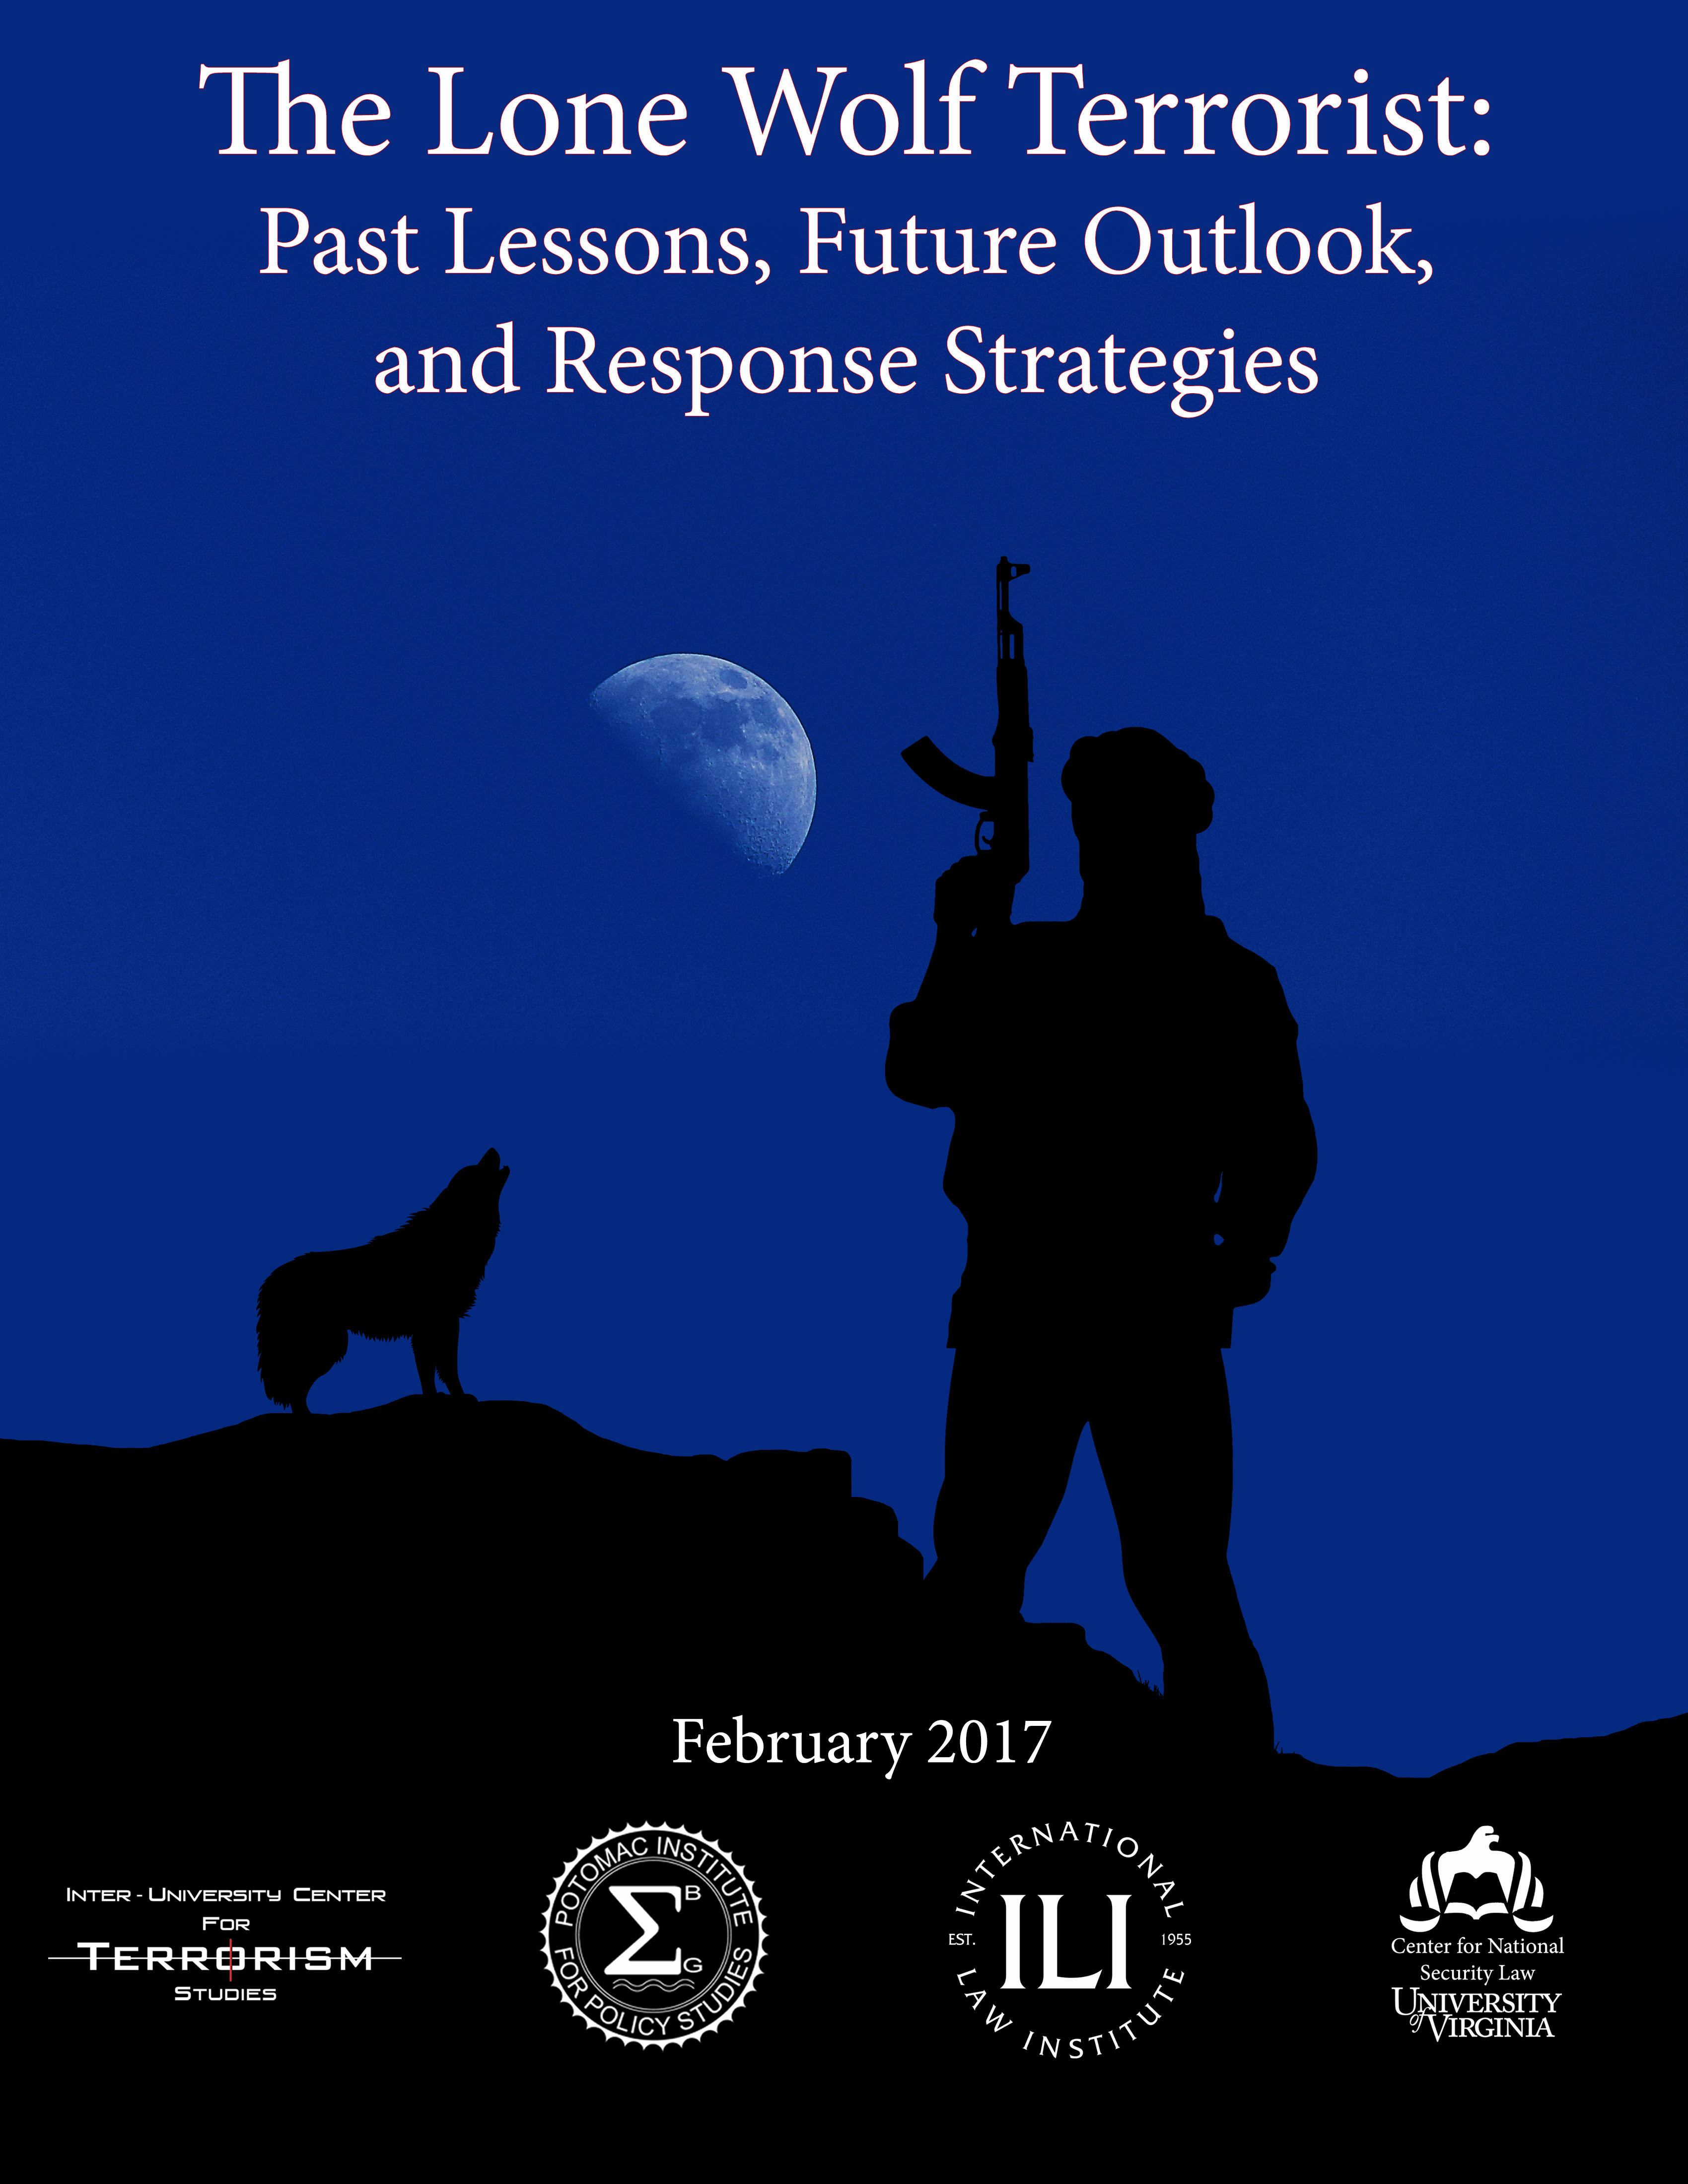 The Lone Wolf Terrorist: Past Lessons, Future Outlook, and Response Strategies